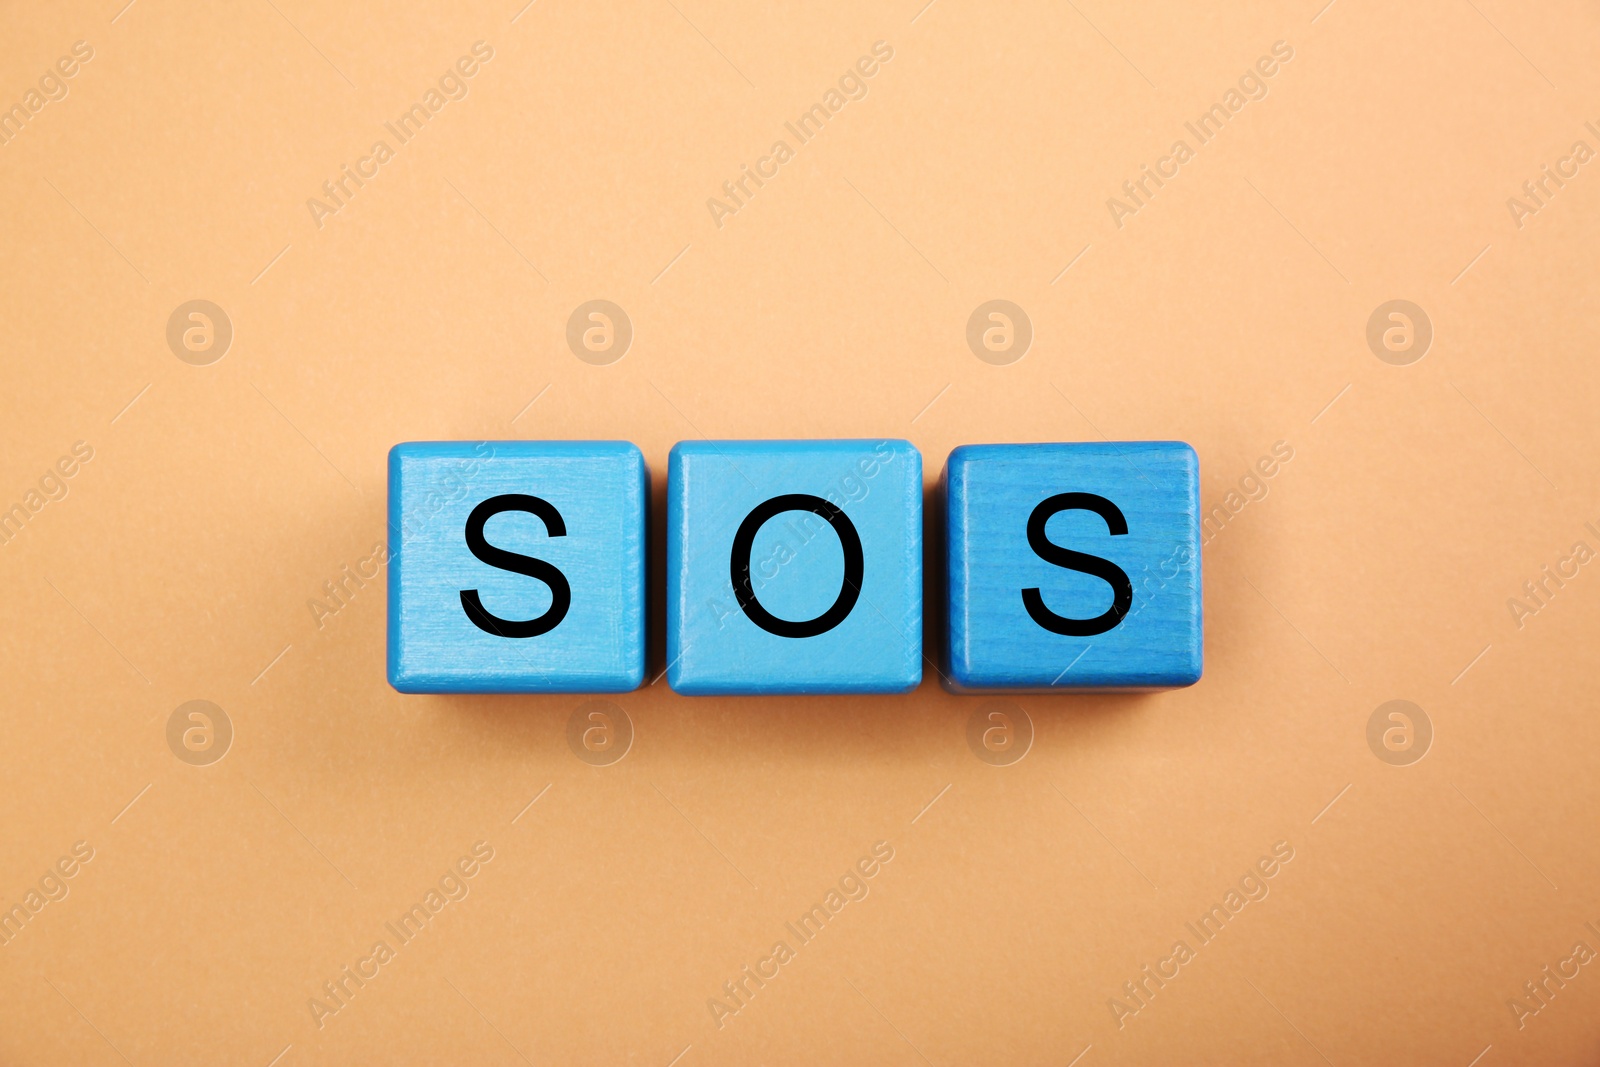 Photo of Abbreviation SOS (Save Our Souls) made of light blue cubes with letters on pale coral background, top view